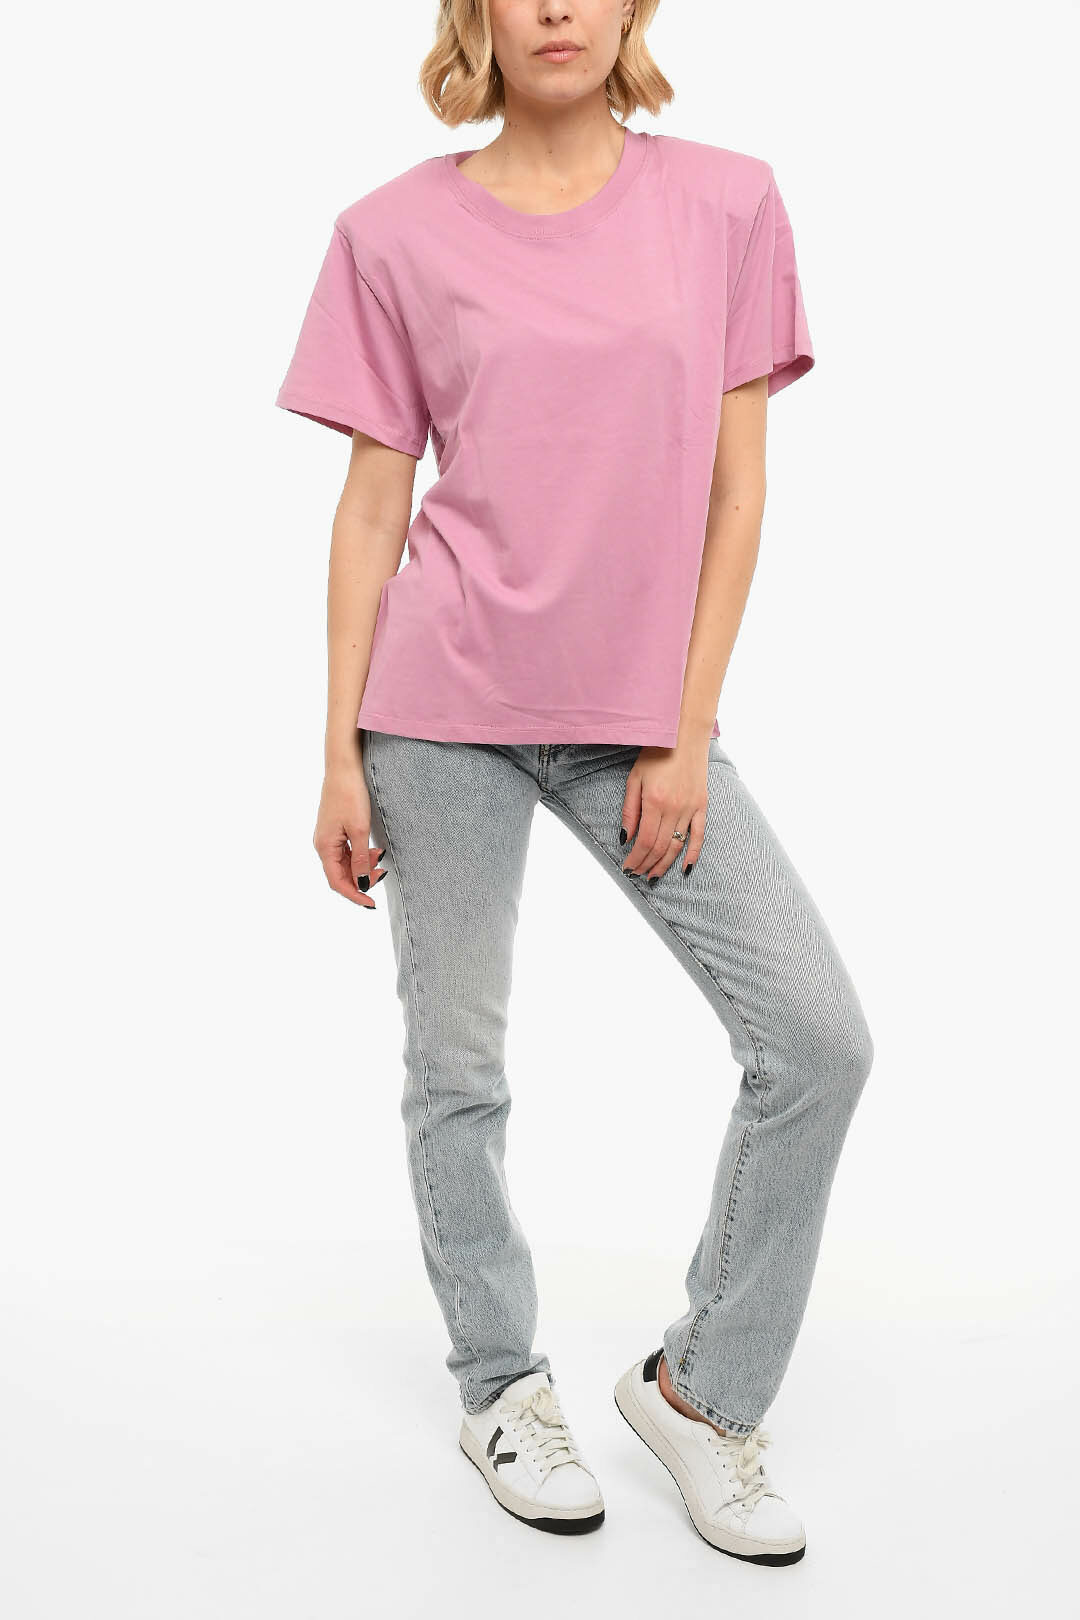 Short-sleeved t-shirt with shoulder pads - Women